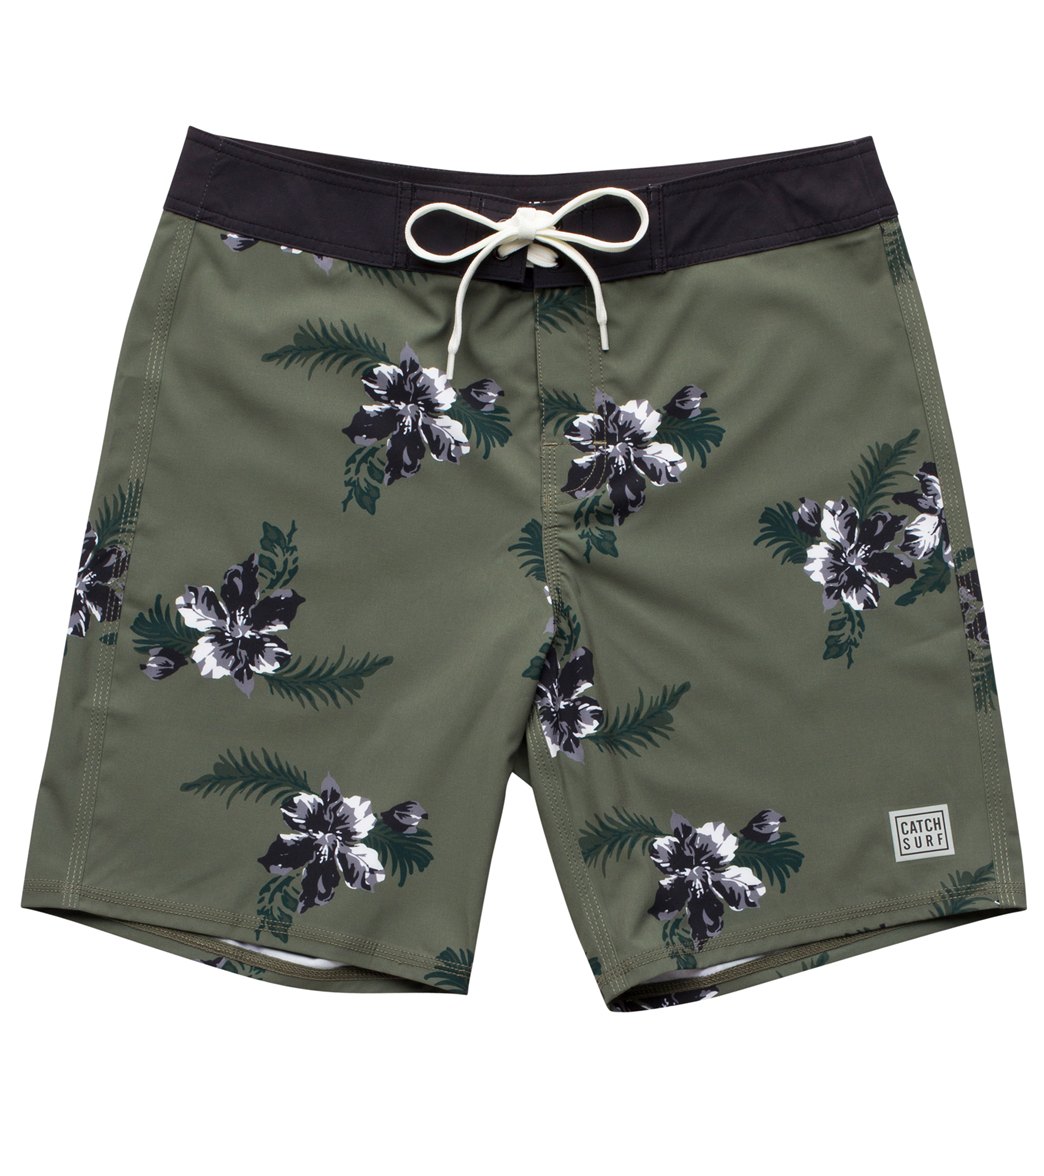 Catch Surf Men's All Day Trunk 18 Inch - Green 30 - Swimoutlet.com